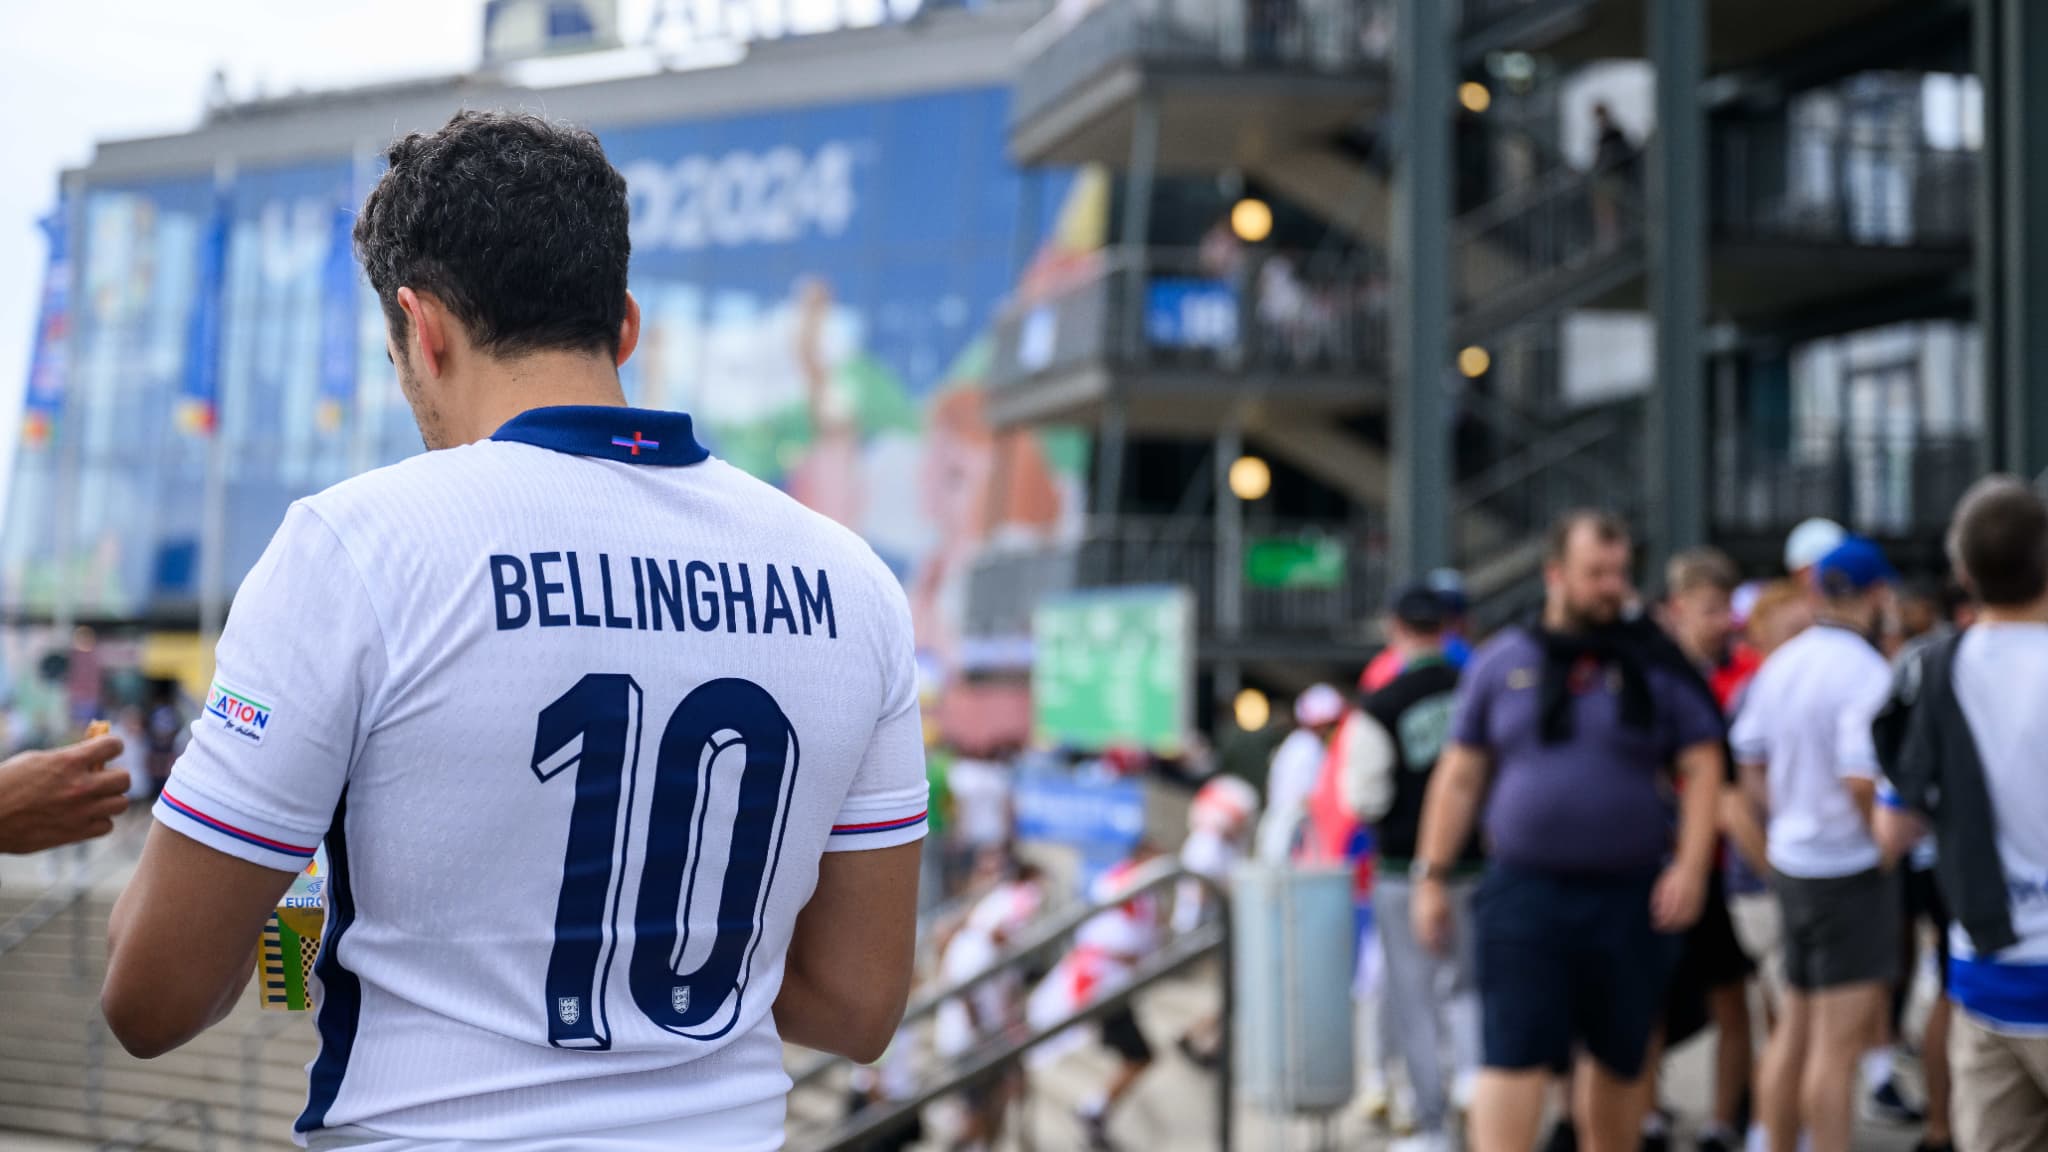 Bellingham’s incredible goal as the England fans leave the ground before the end of the game